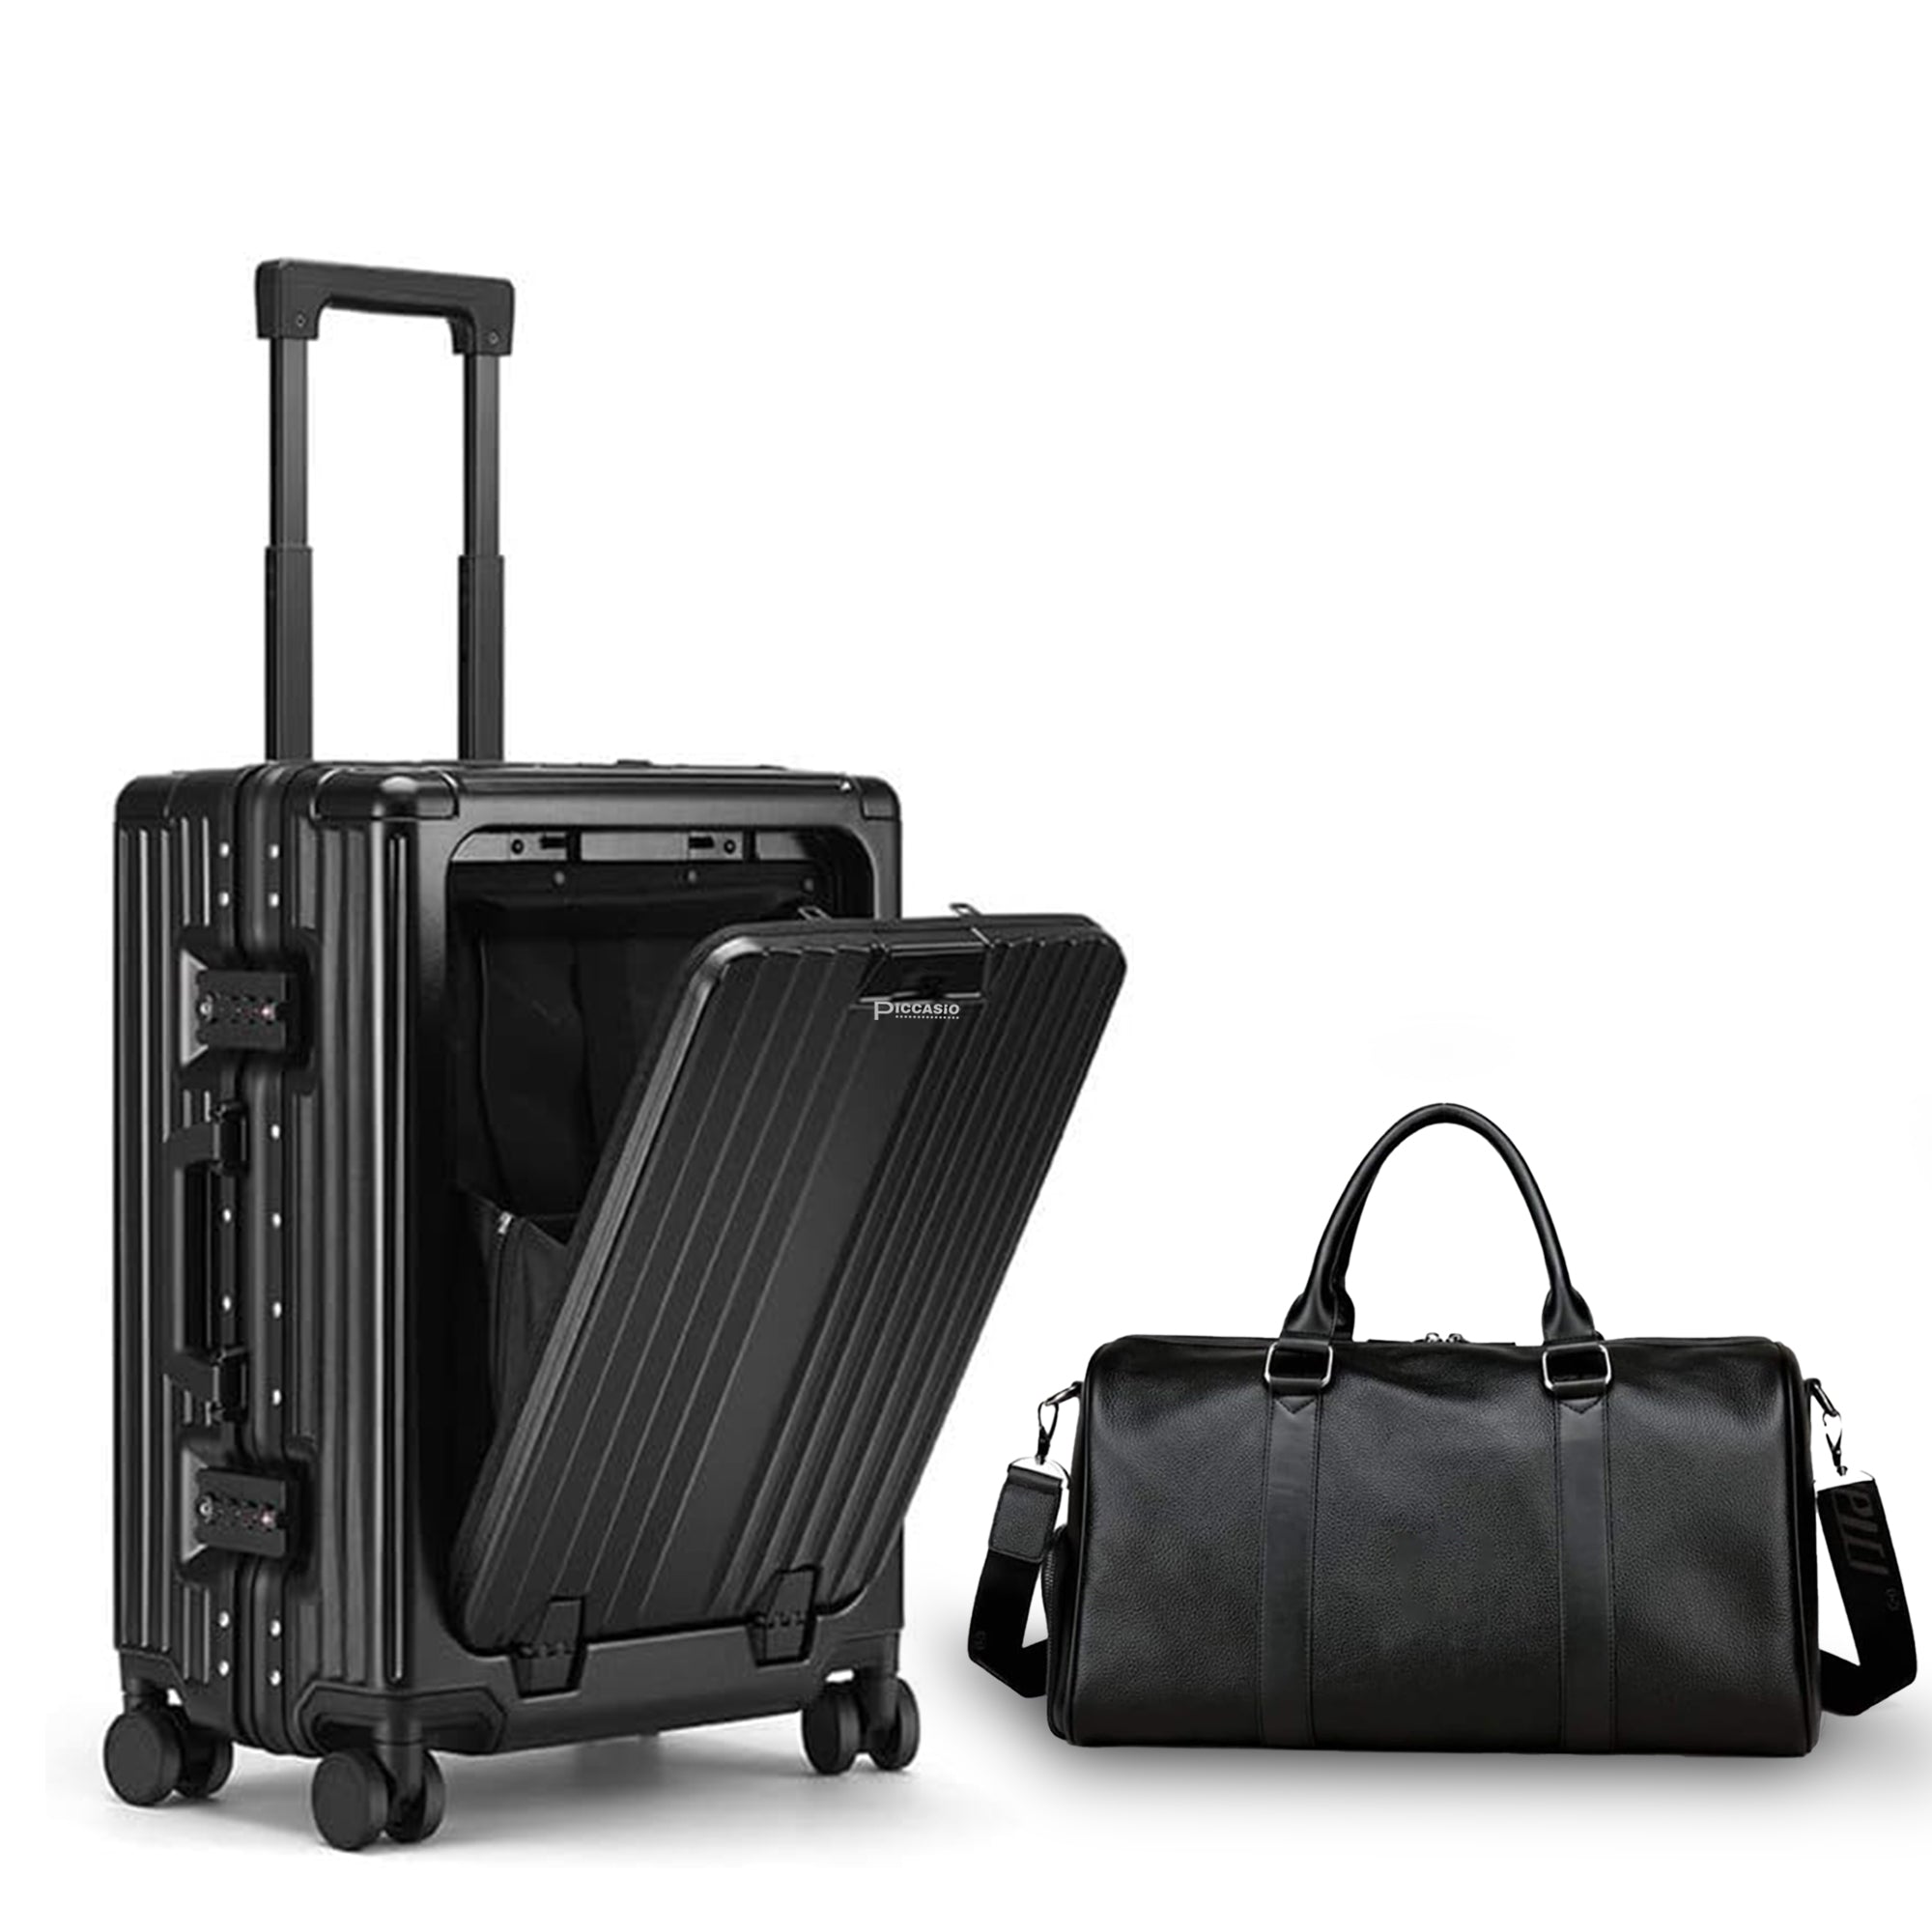 Travel Luggage with Spinner Wheels, Power bank installed, Laptop pocket